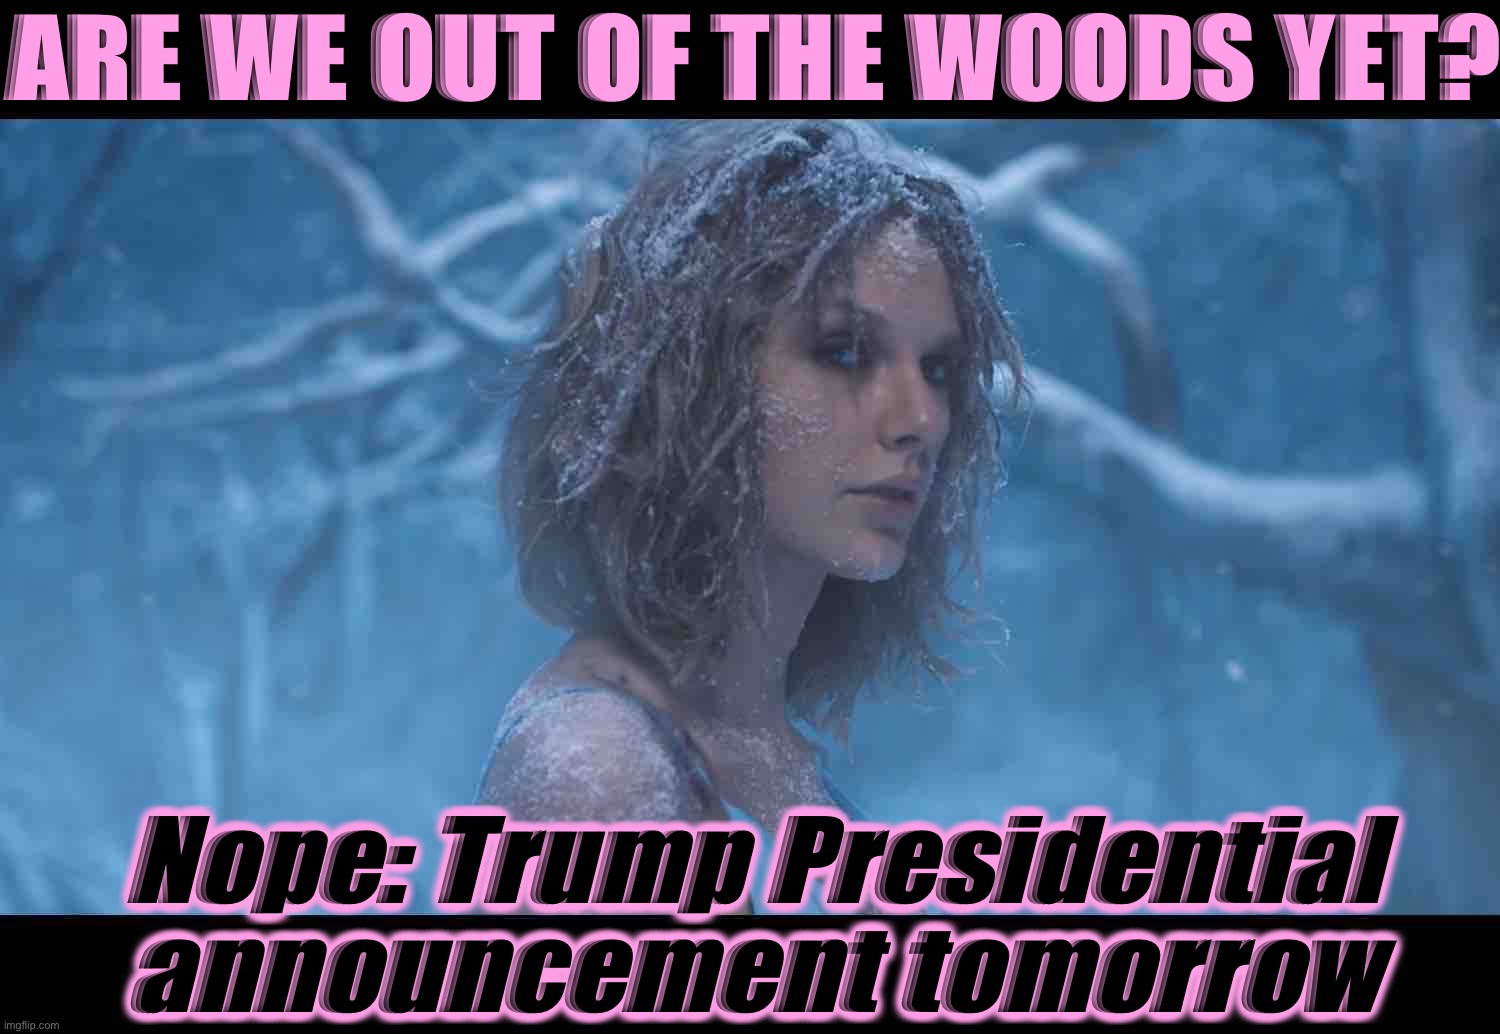 Wouldn’t it be nice to catch a political breather after these midterms? Nope, Trump won’t let it happen | ARE WE OUT OF THE WOODS YET? Nope: Trump Presidential announcement tomorrow | image tagged in taylor swift out of the woods,trump,donald trump,midterms,trump is an asshole,trump to gop | made w/ Imgflip meme maker